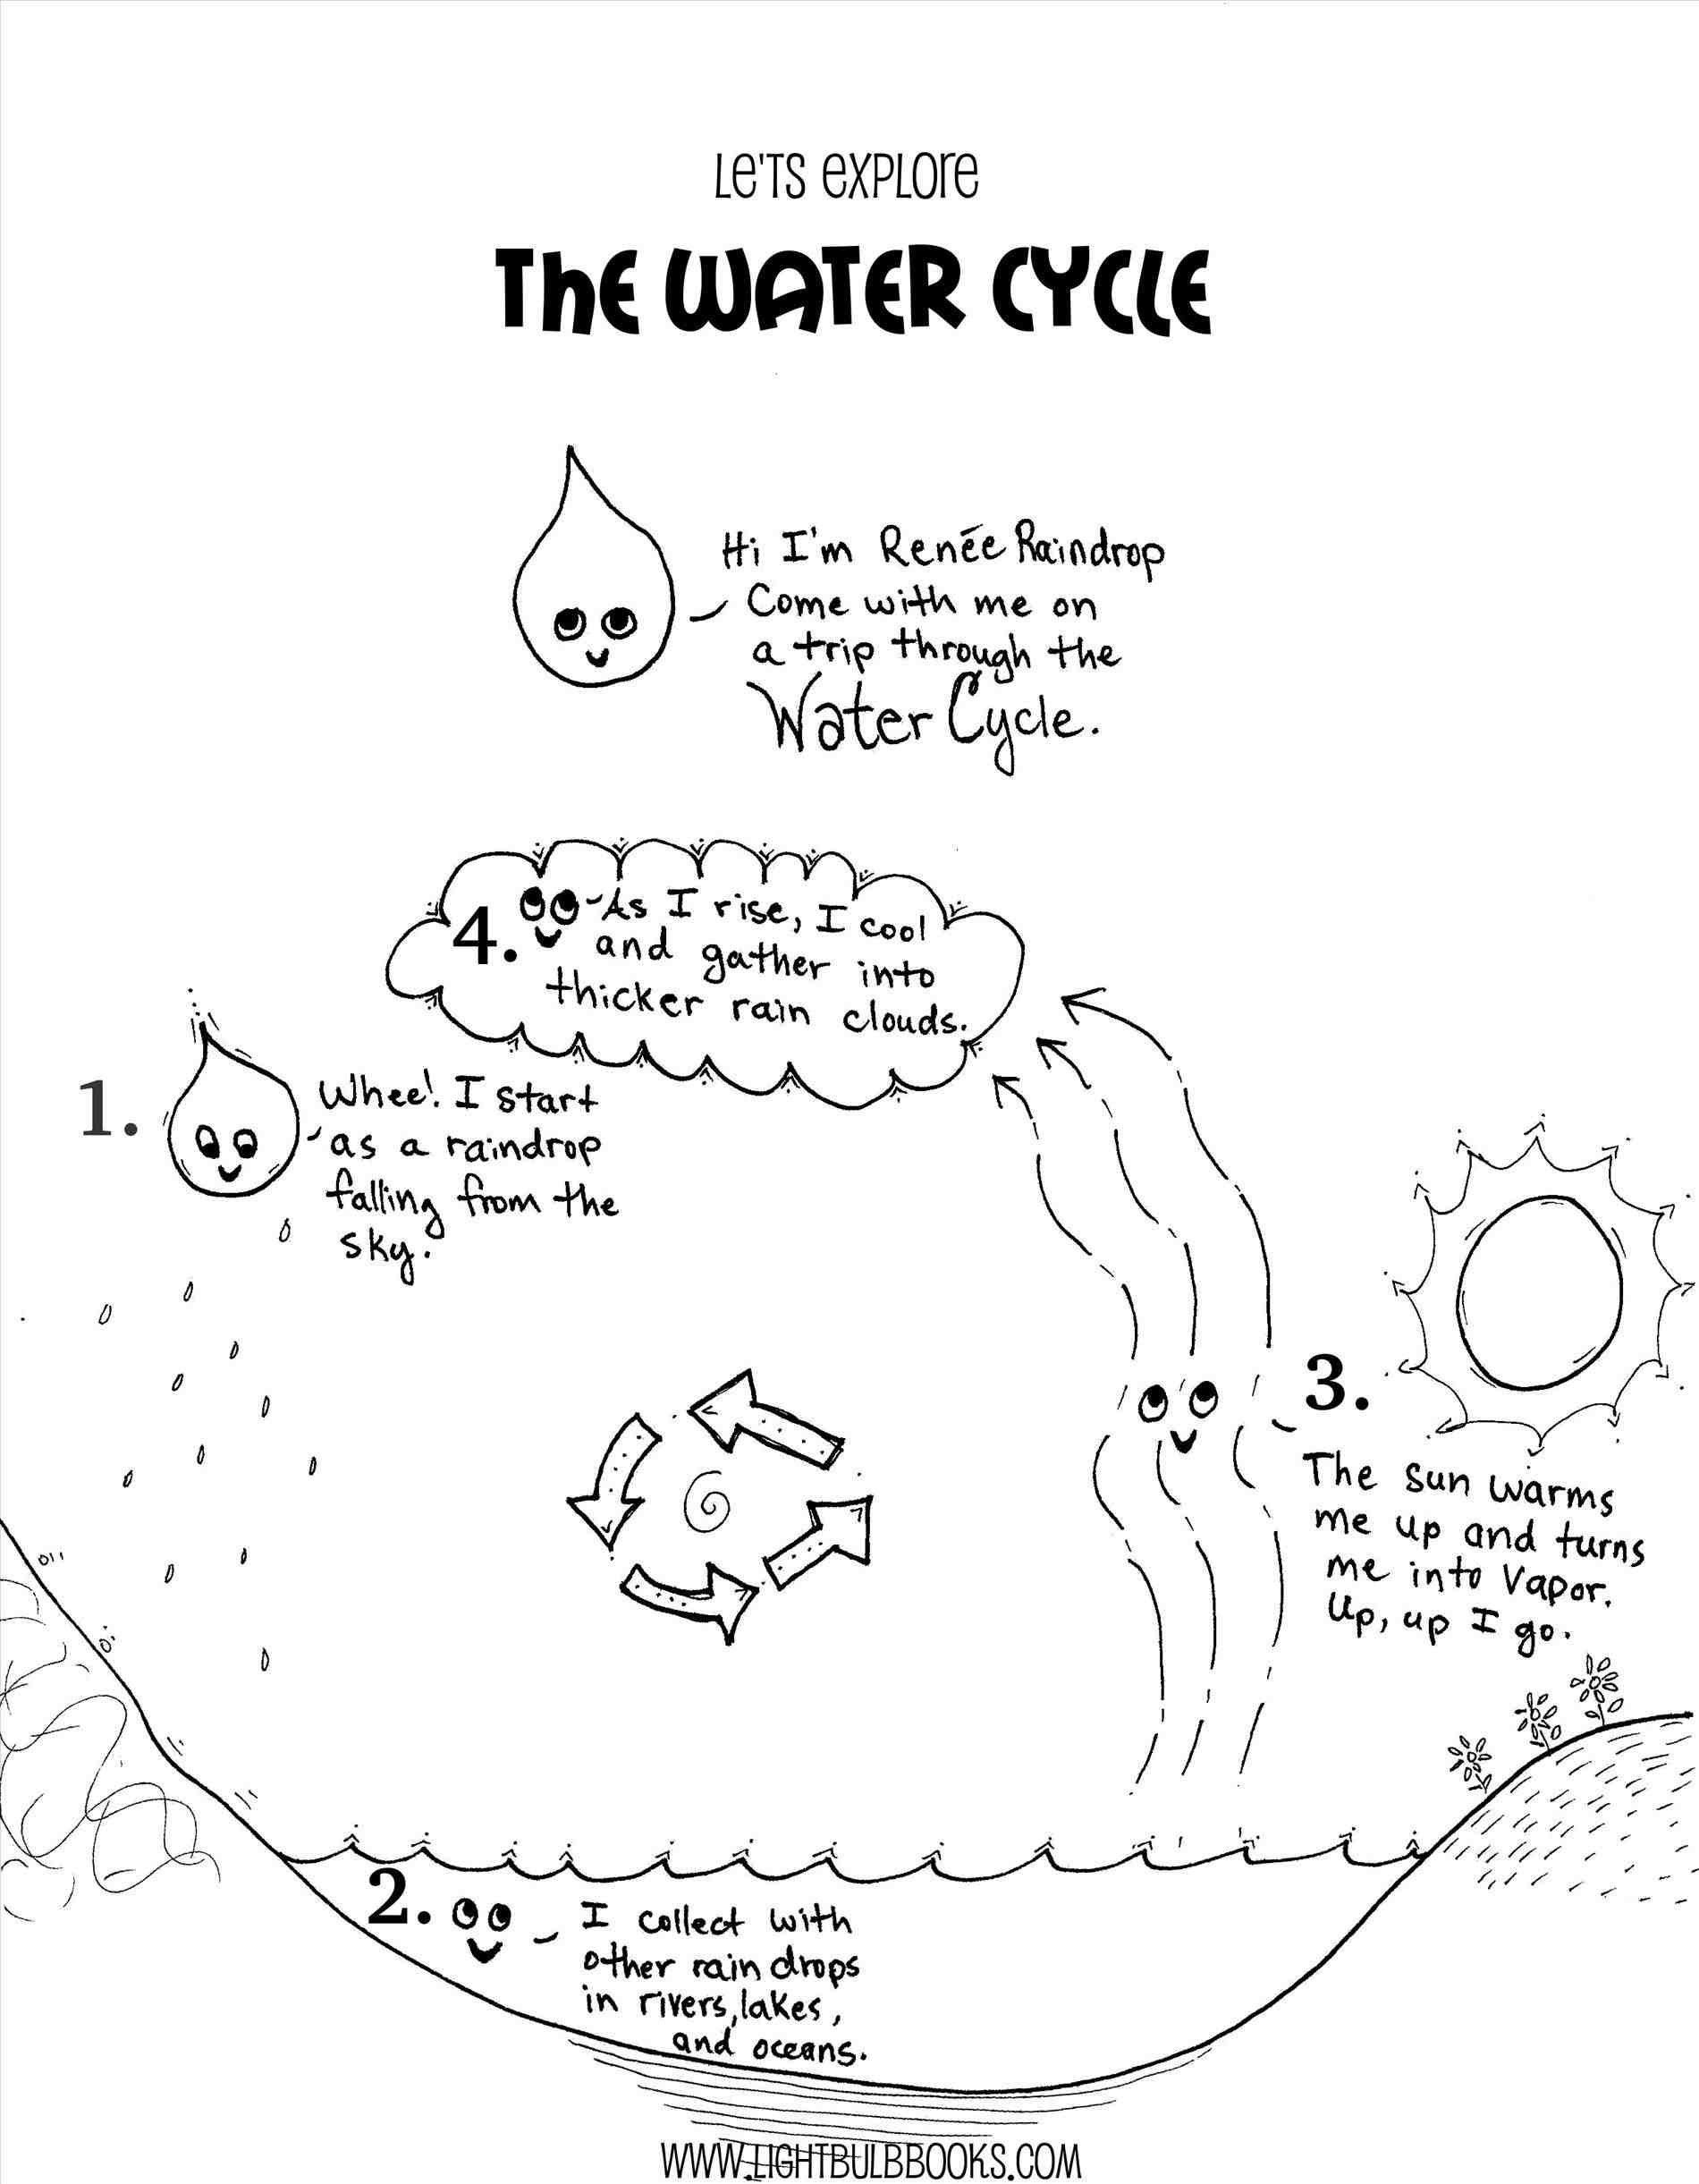 Rock Cycle Diagram Awesome Rock Cycle Diagram Coloring Pages Lovespells